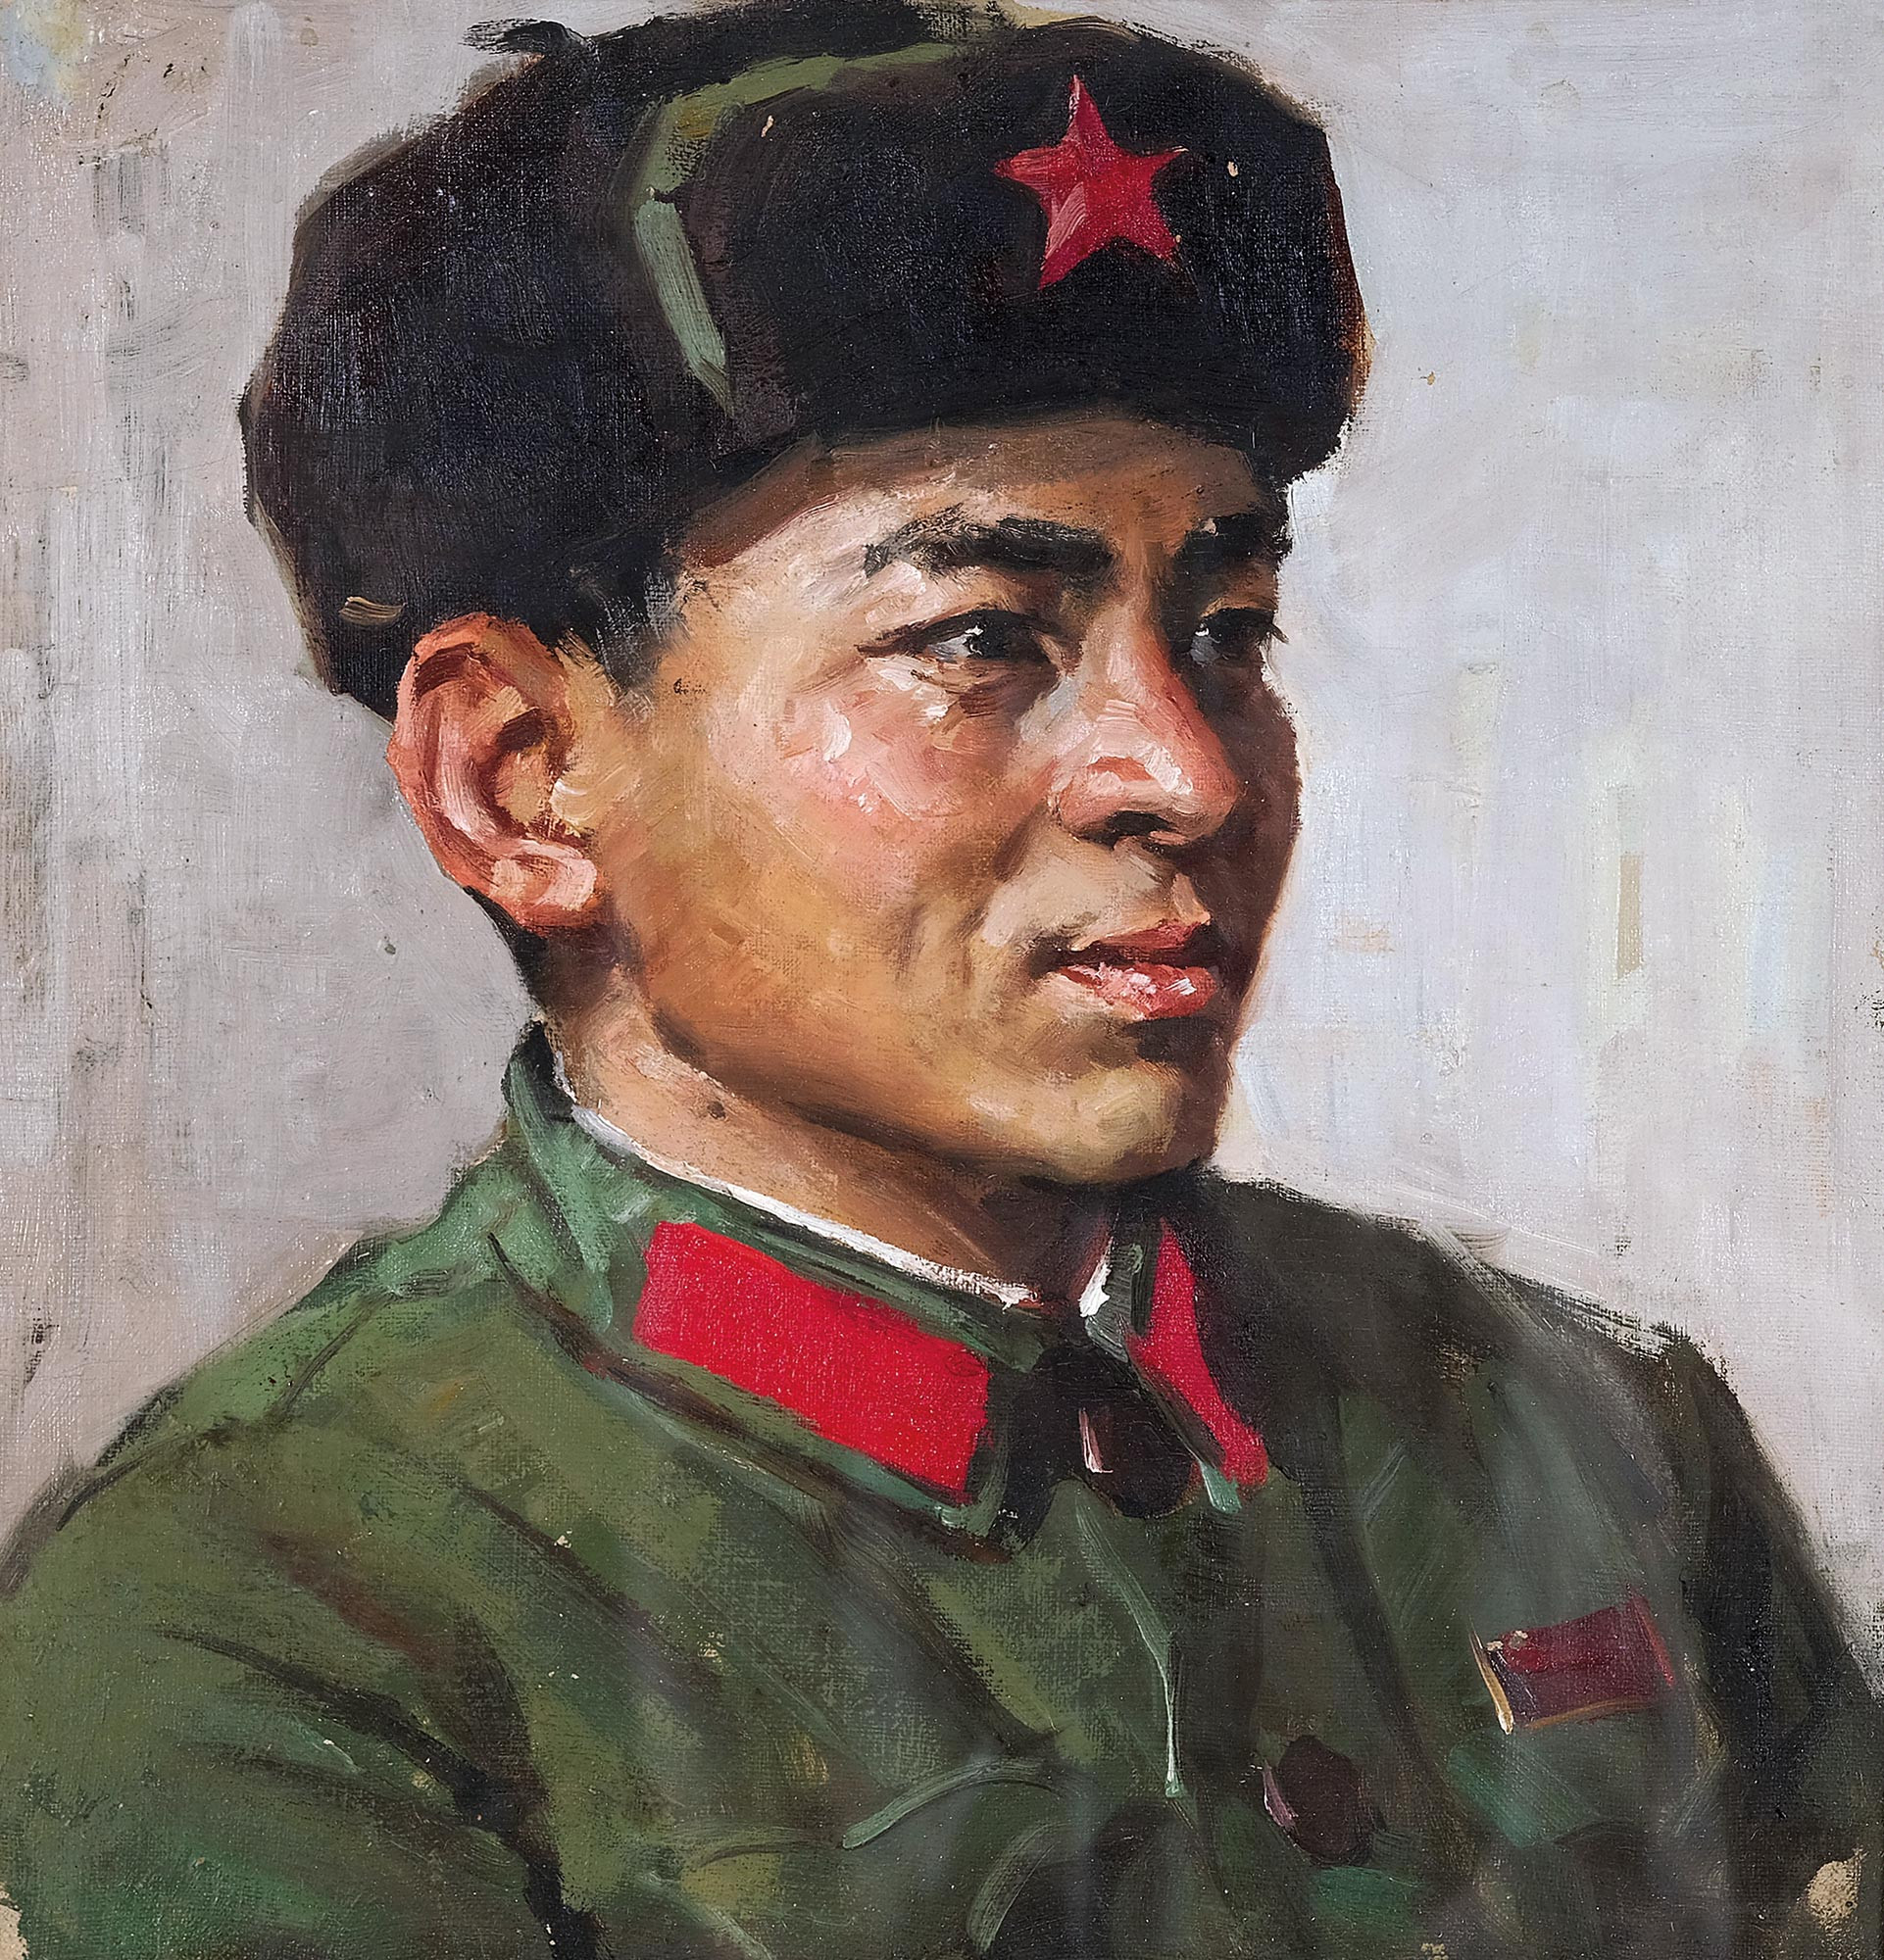 PEOPLE’S LIBERATION ARMY